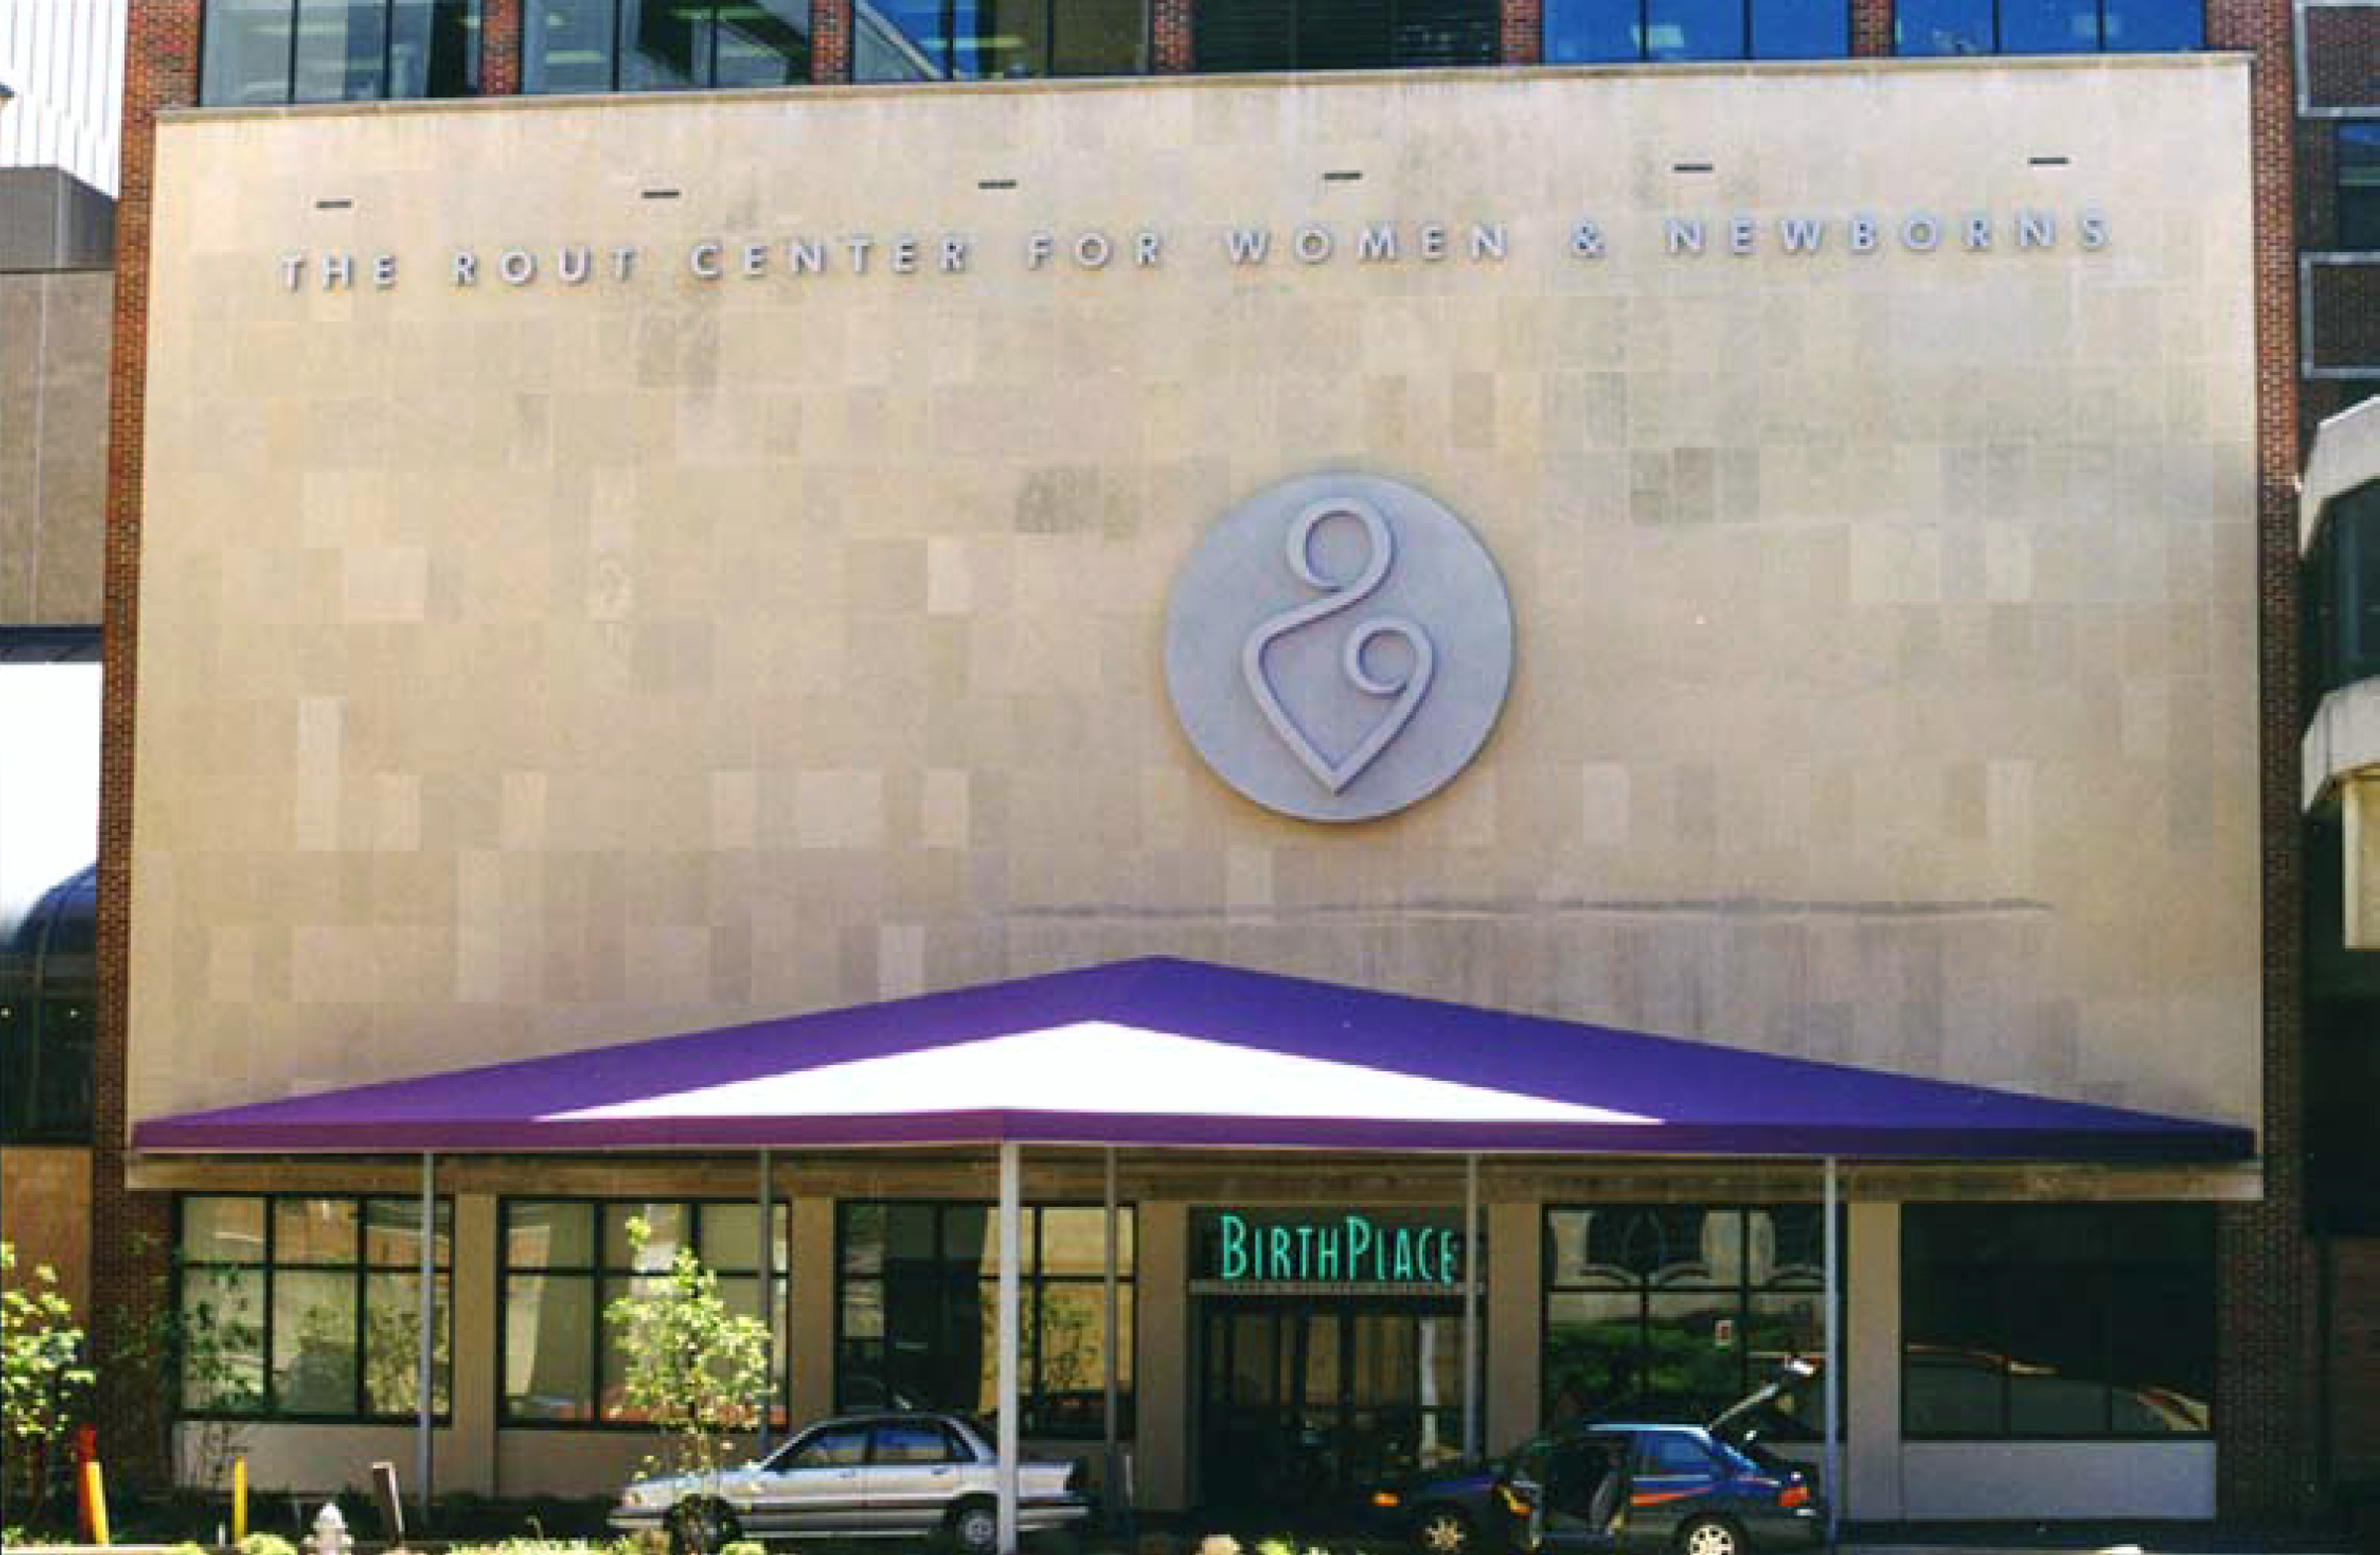  BirthPlace and The Rout Center for Women &amp; Newborns entrance signage at Regional One Medical Center, formerly The MED  Naming, branding creative and design by Chuck Mitchell  Sign fabrication and installation by Frank Balton Sign Co. 